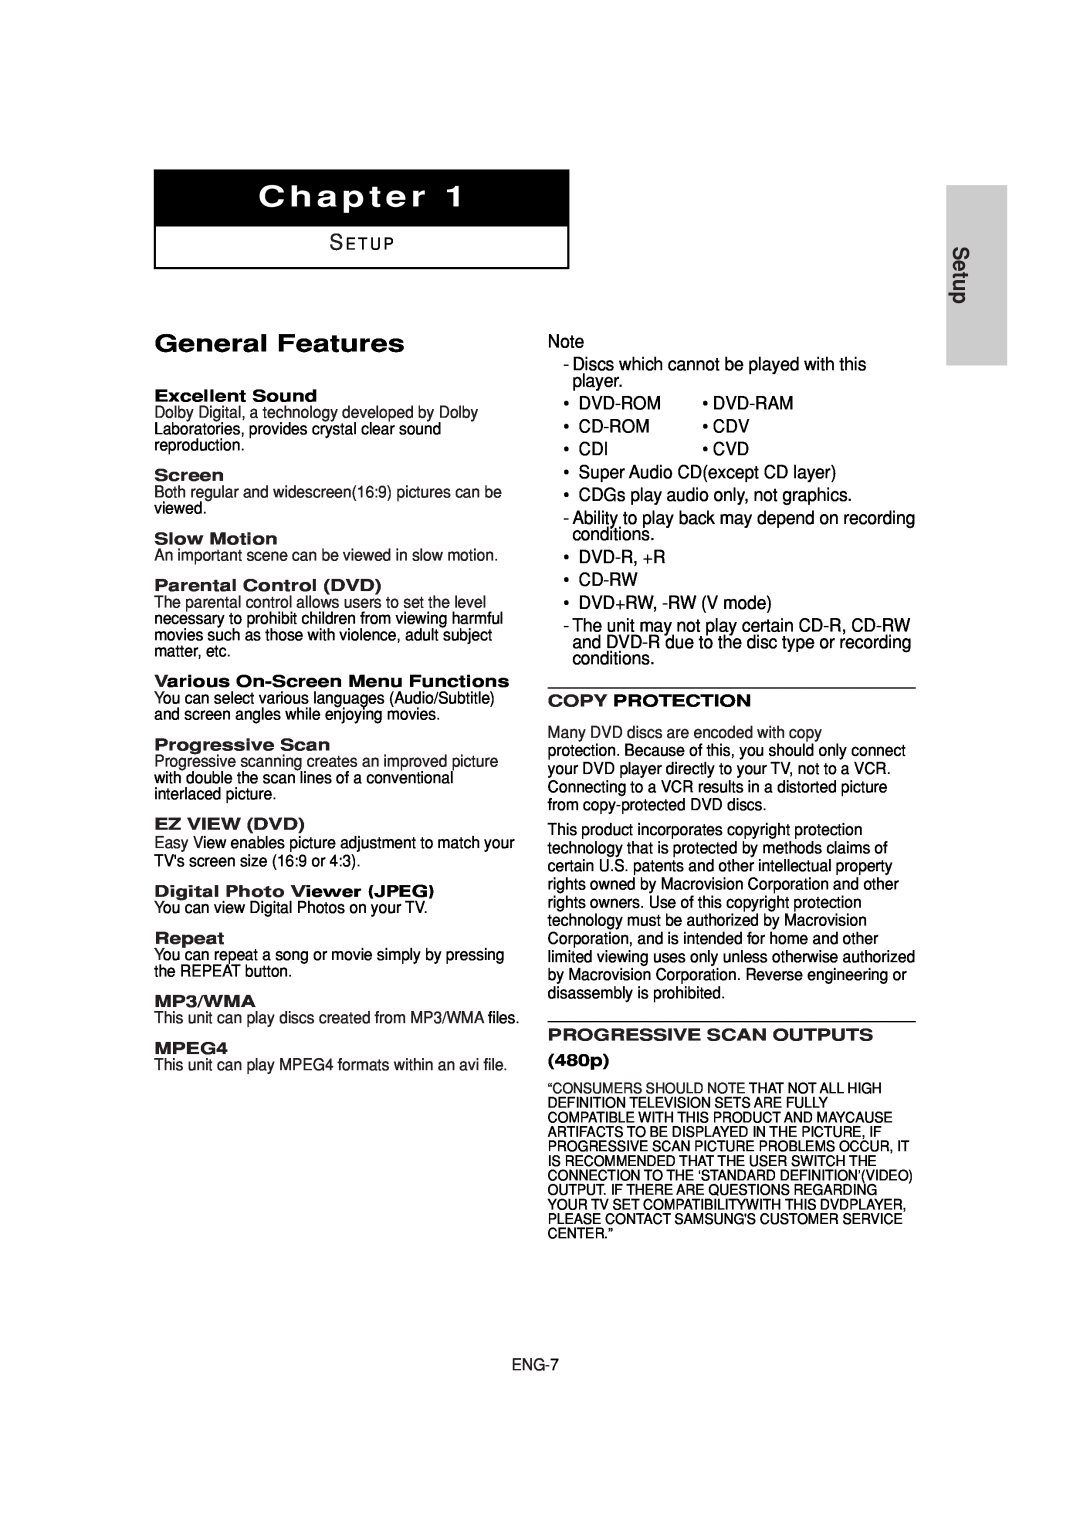 Samsung DVD-P181 manual Chapter, General Features, Setup 